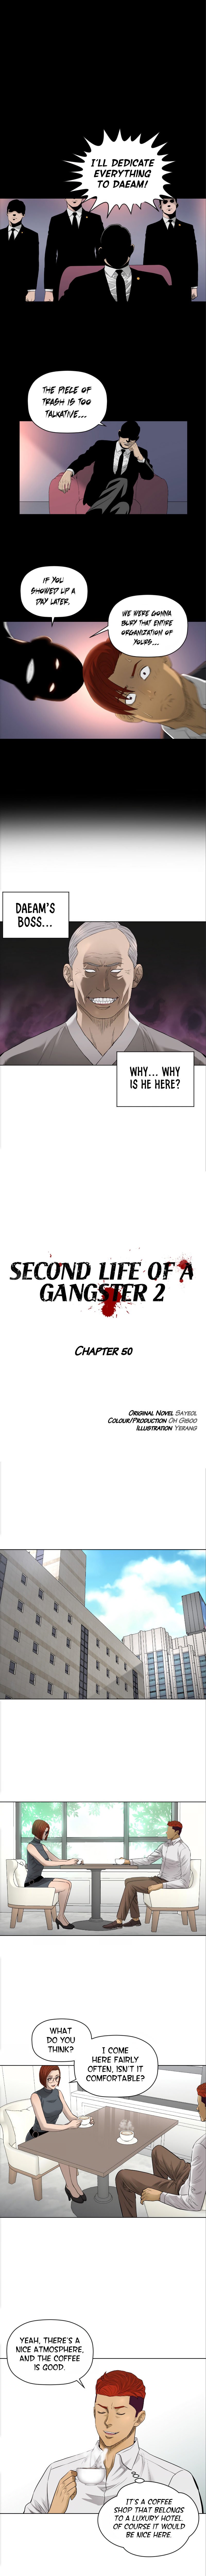 second-life-of-a-gangster-chap-102-2